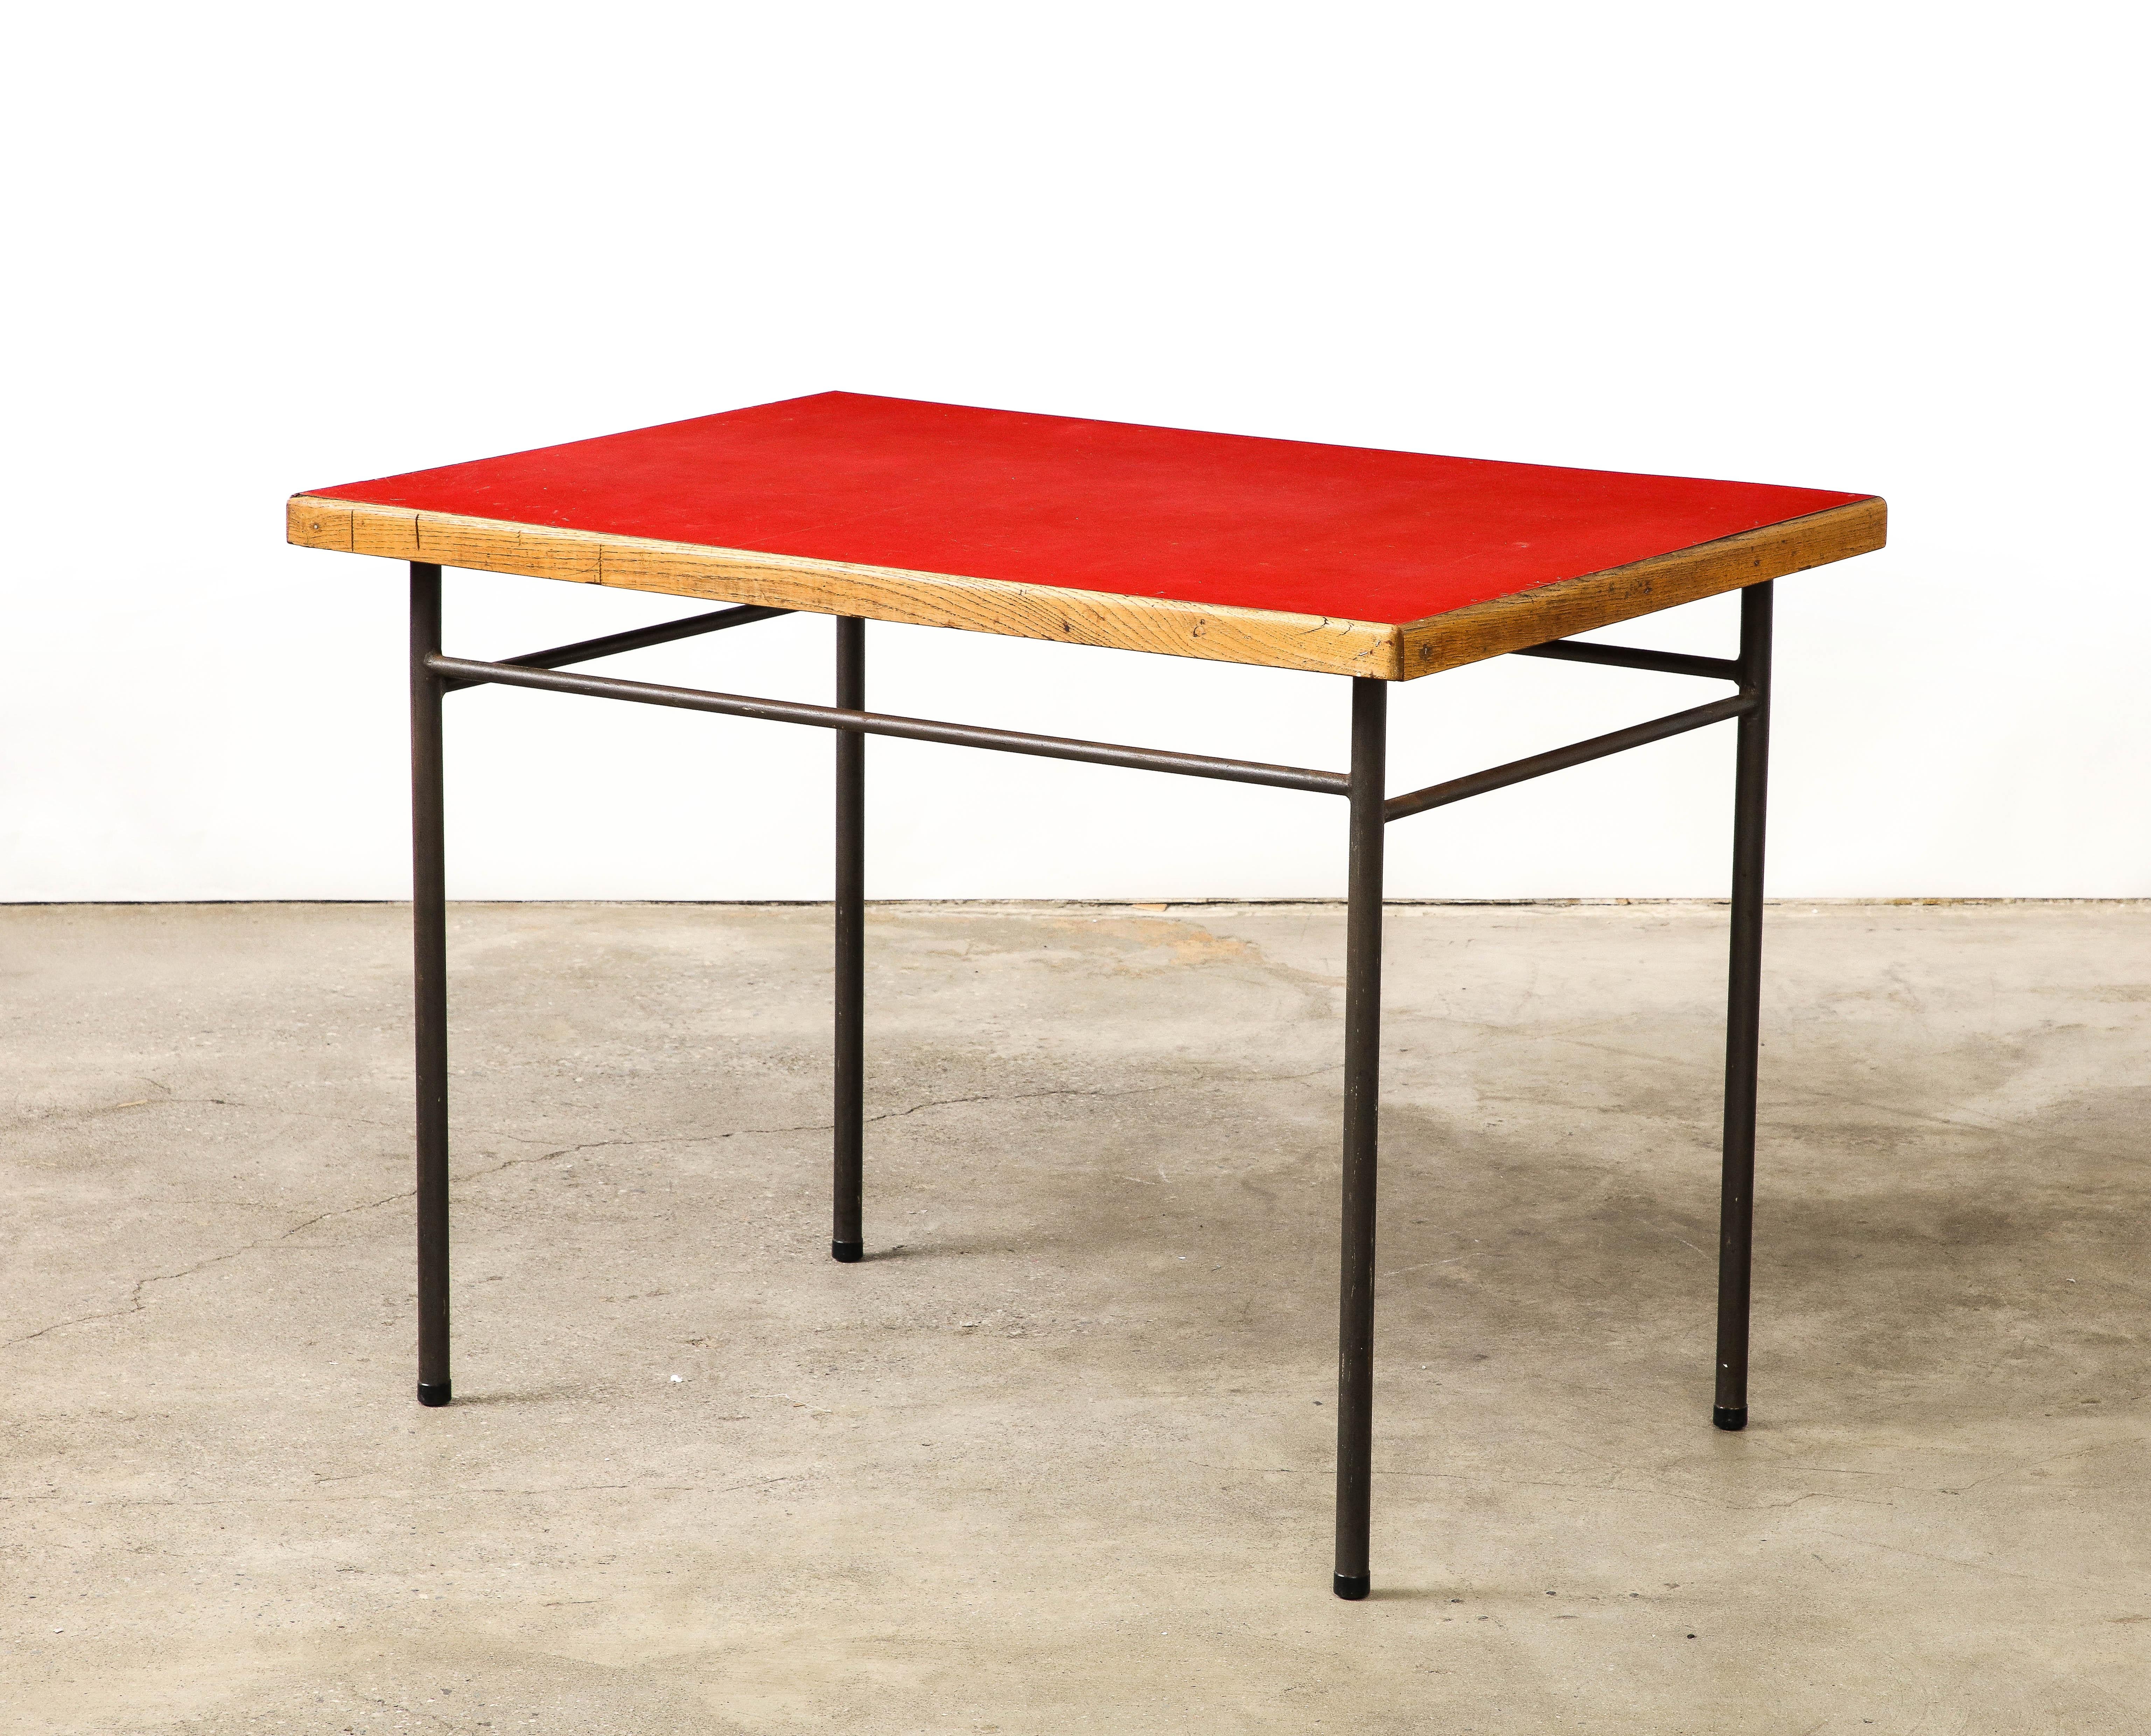 This modernist desk/table was designed by Marcel Gascoin for the Cité Universitaire Jean Zay d'Antony in 1955; the dorm rooms and public spaces encapsulate post-war French design and were collaborated on by designers such as Jean Prouvé, Charlotte